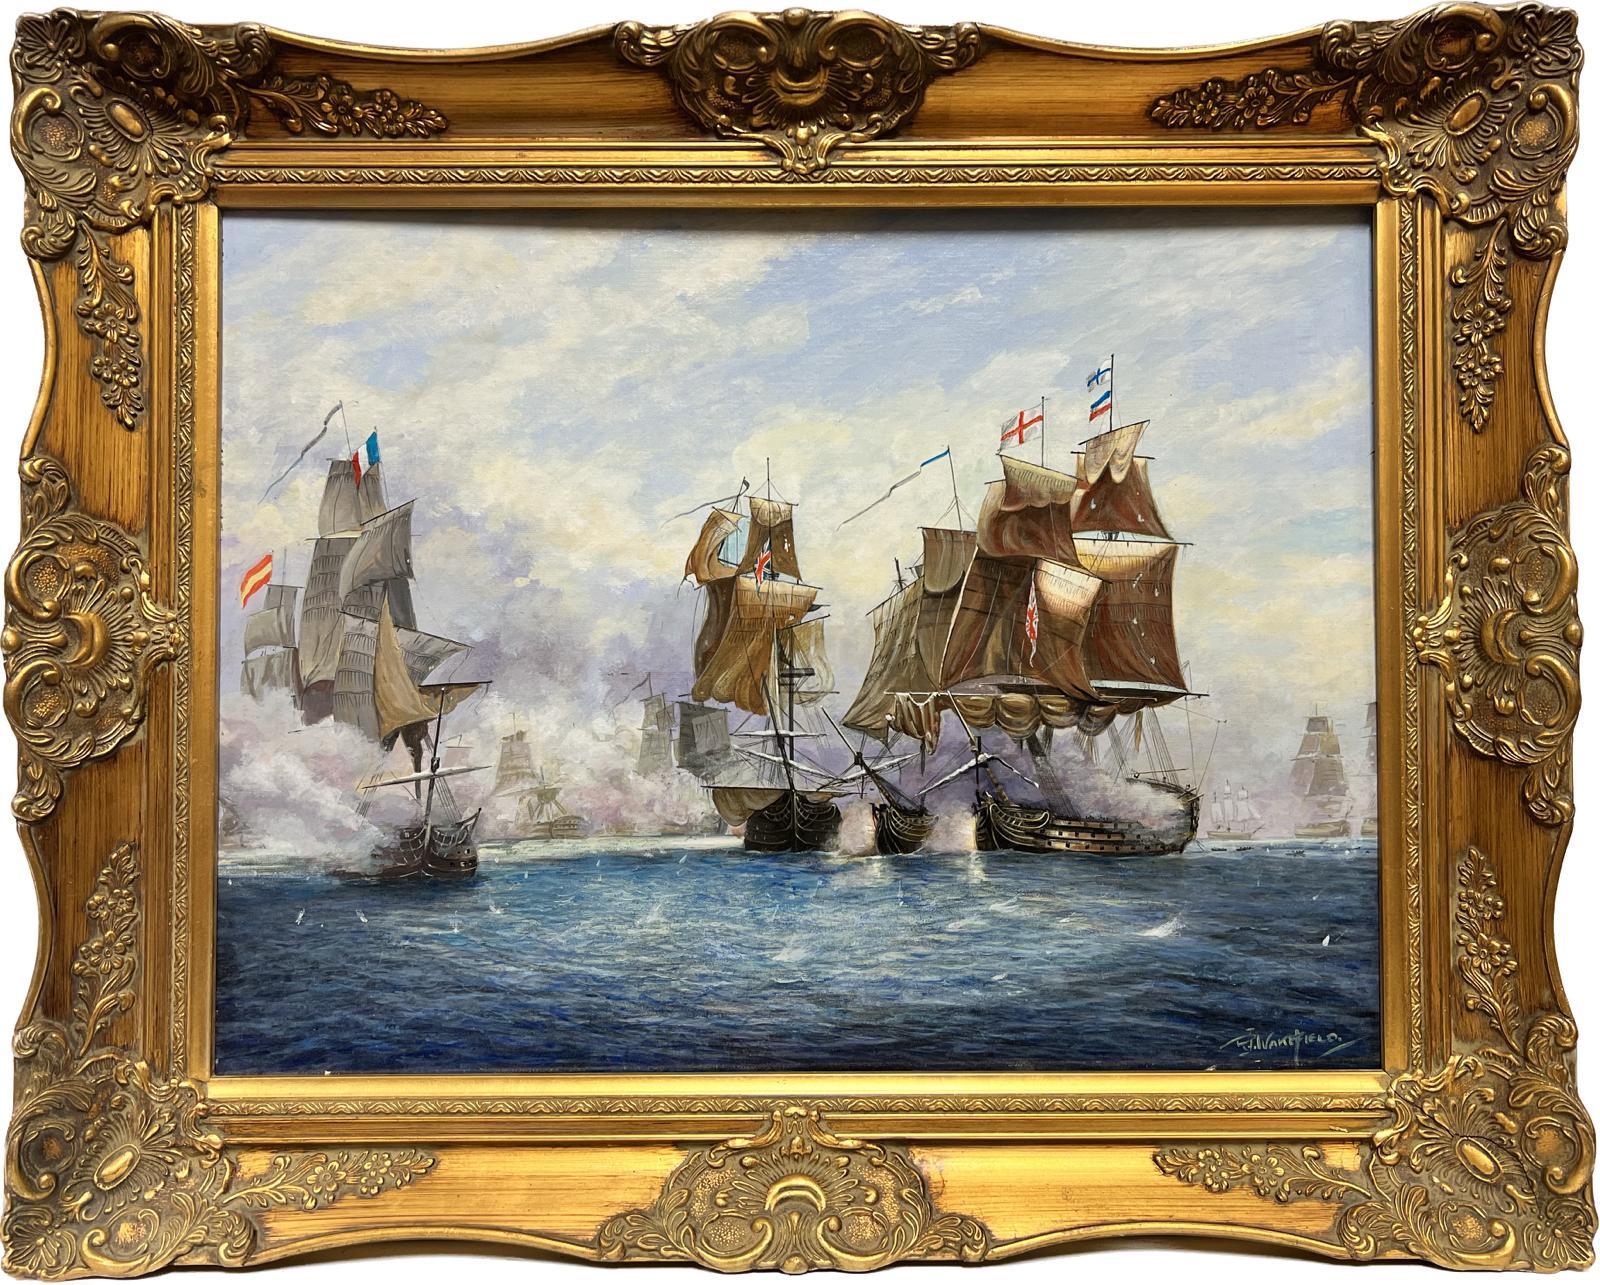 Artist/ School: R J Wakefield, Signed, British late 20th entury

Title: The Battle of Trafalgar 

Medium: oil on canvas board, framed and inscribed verso

Framed: 24 x 30 inches
Painting: 18 x 24 inches

Provenance: private collection,